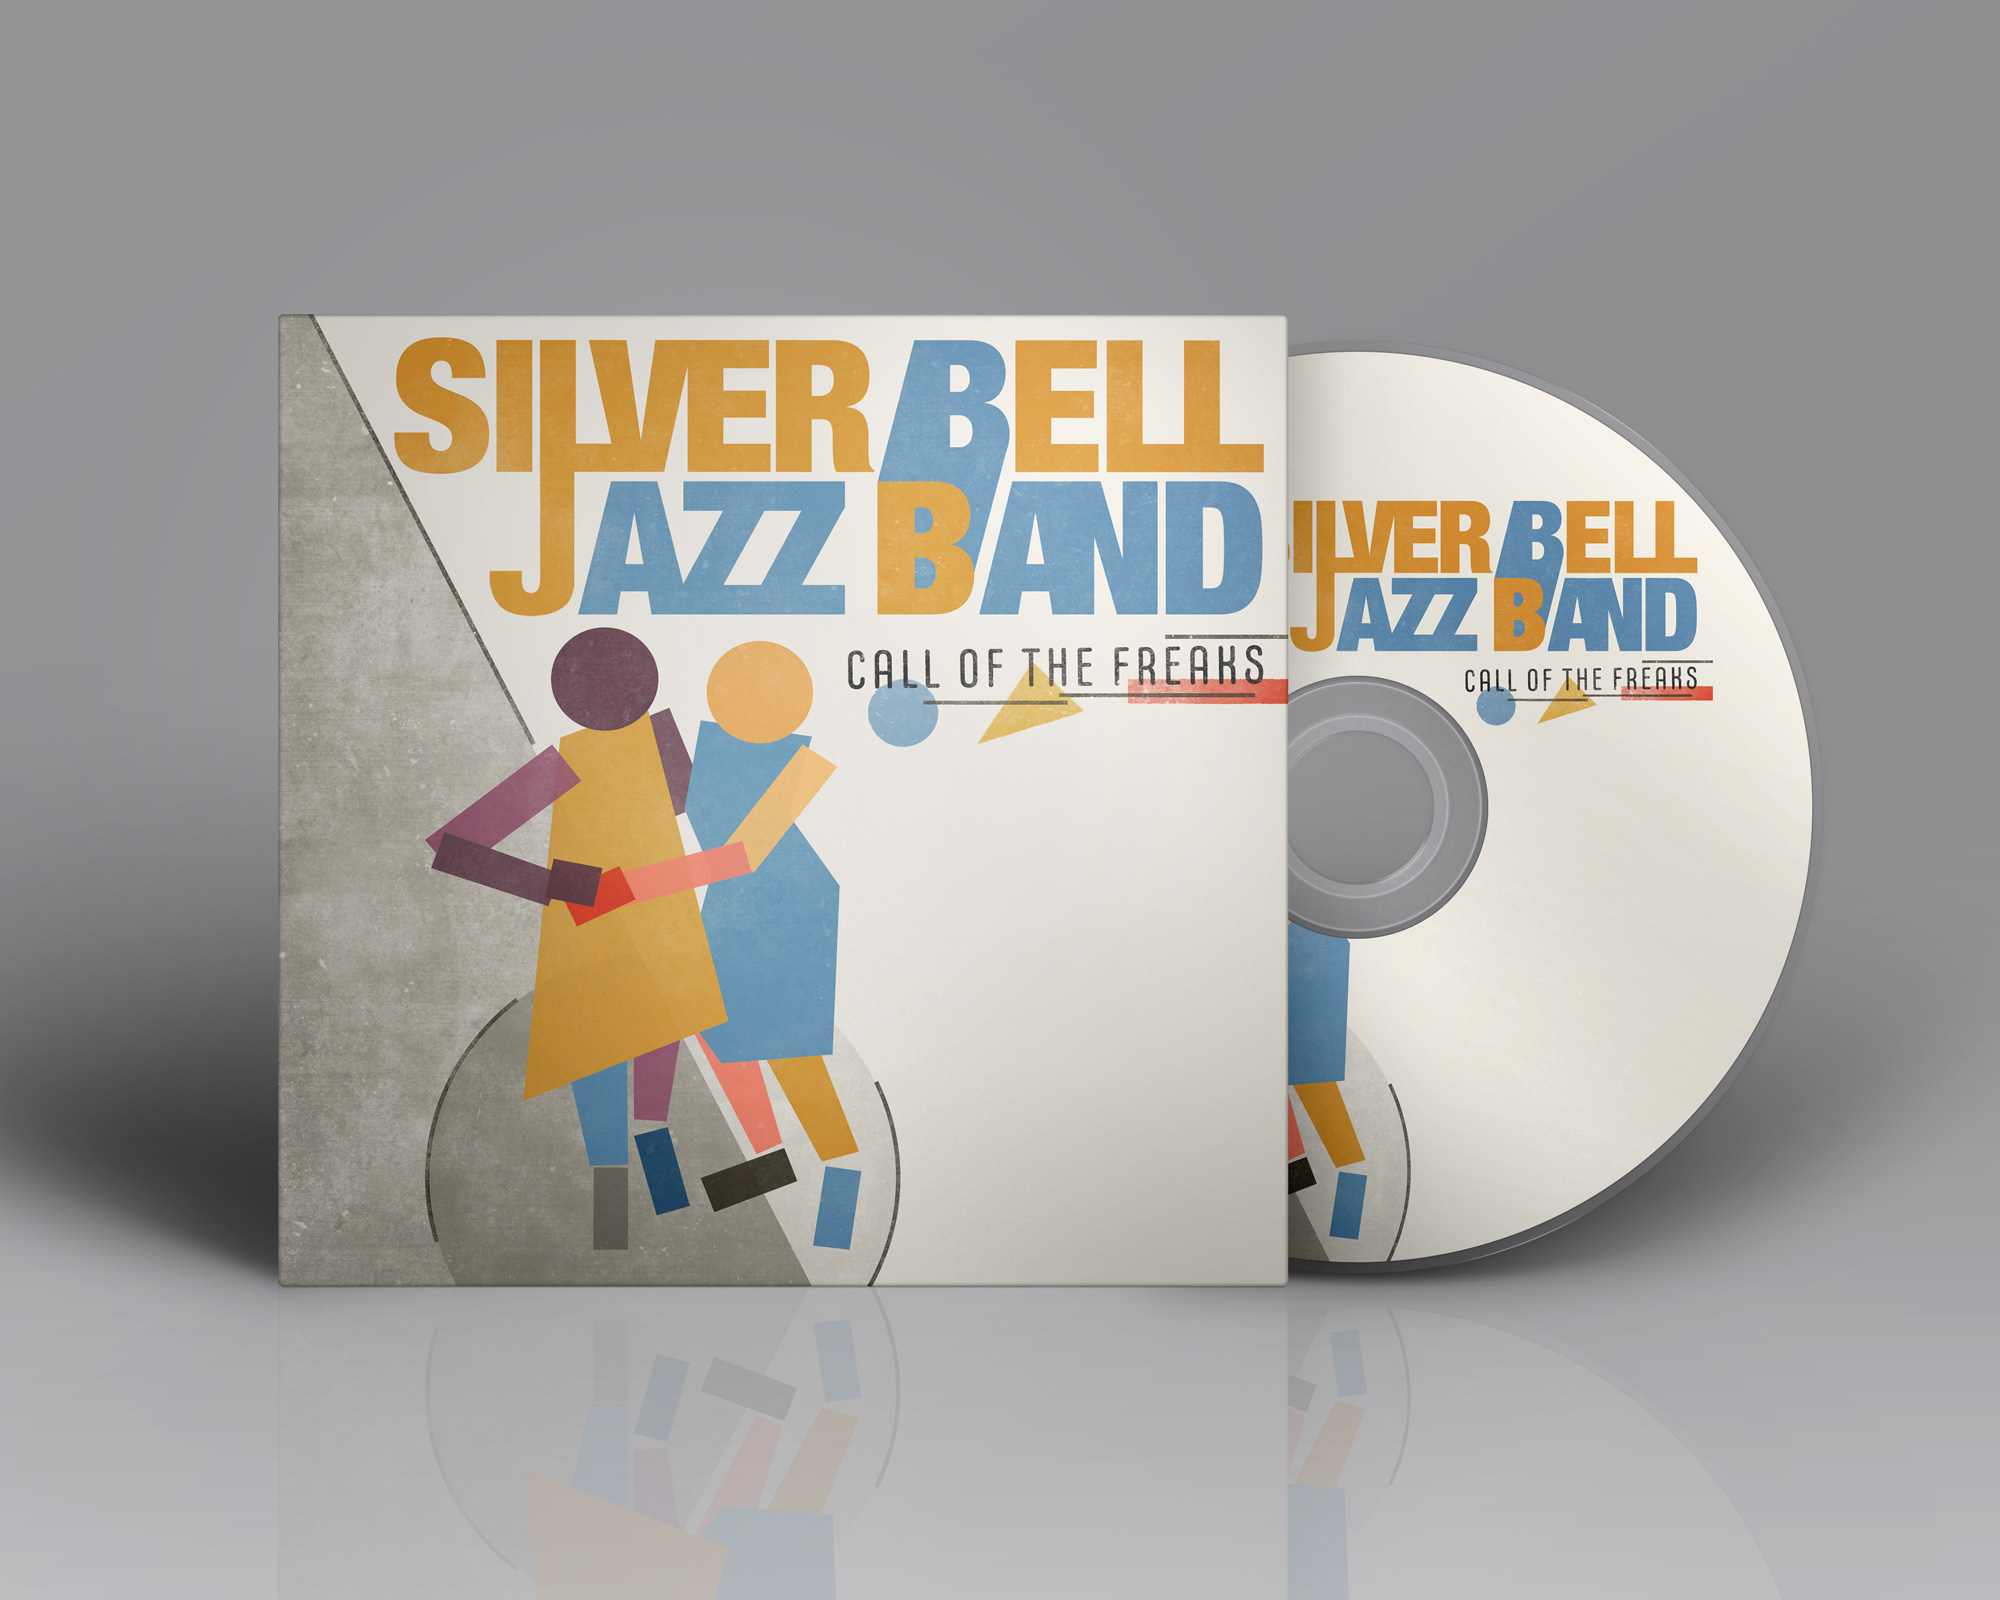 Call of the freaks Silver Bell Jazz Band album design